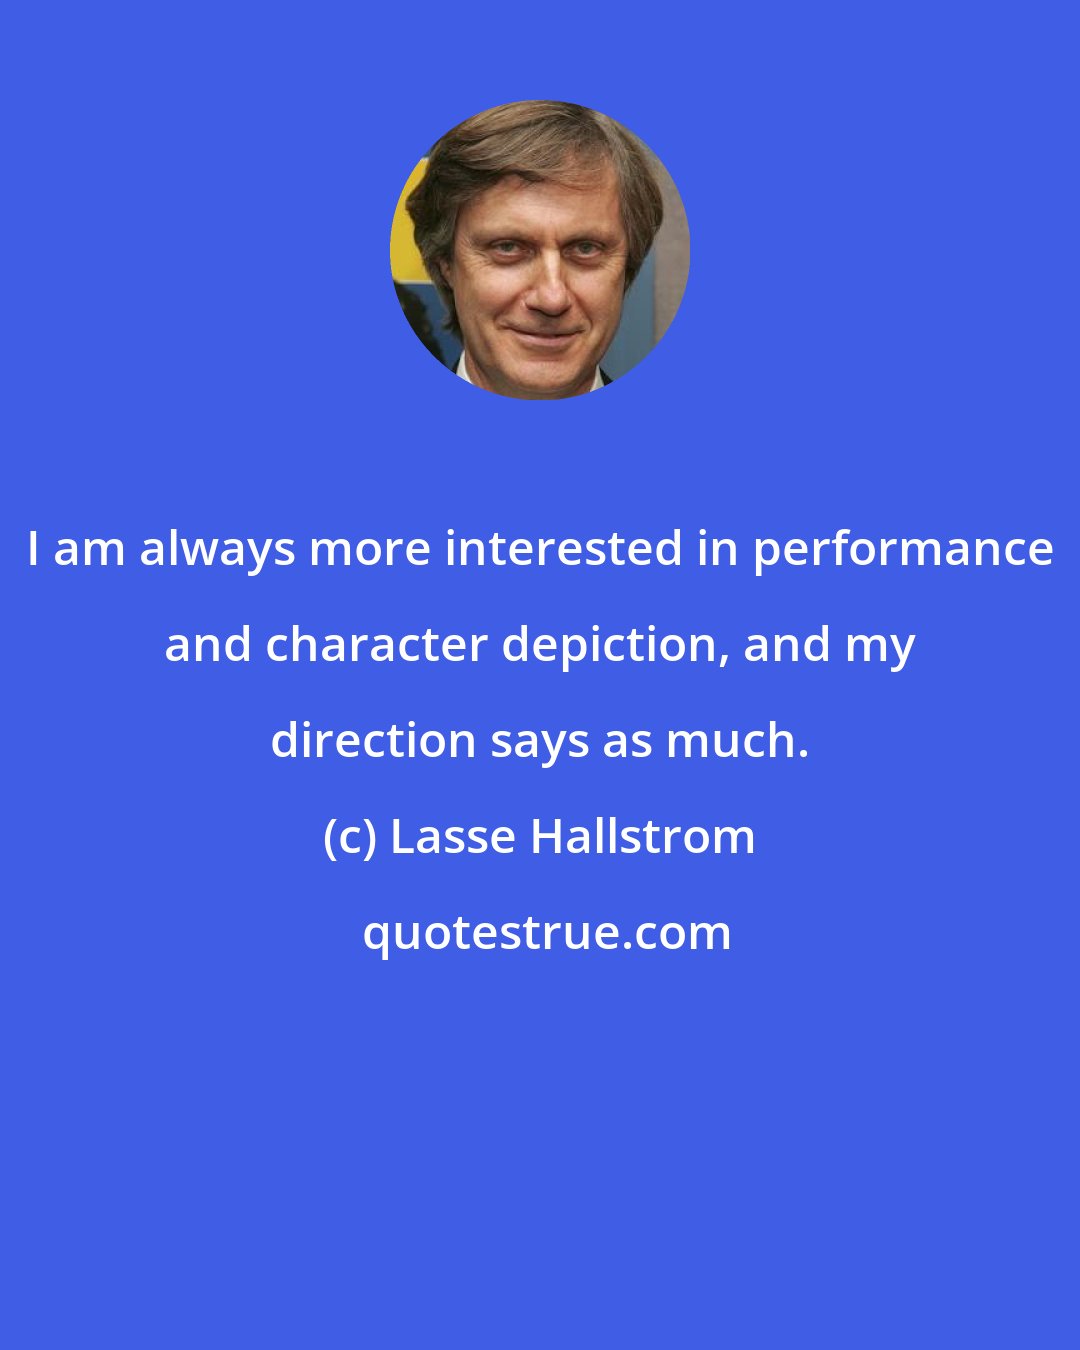 Lasse Hallstrom: I am always more interested in performance and character depiction, and my direction says as much.